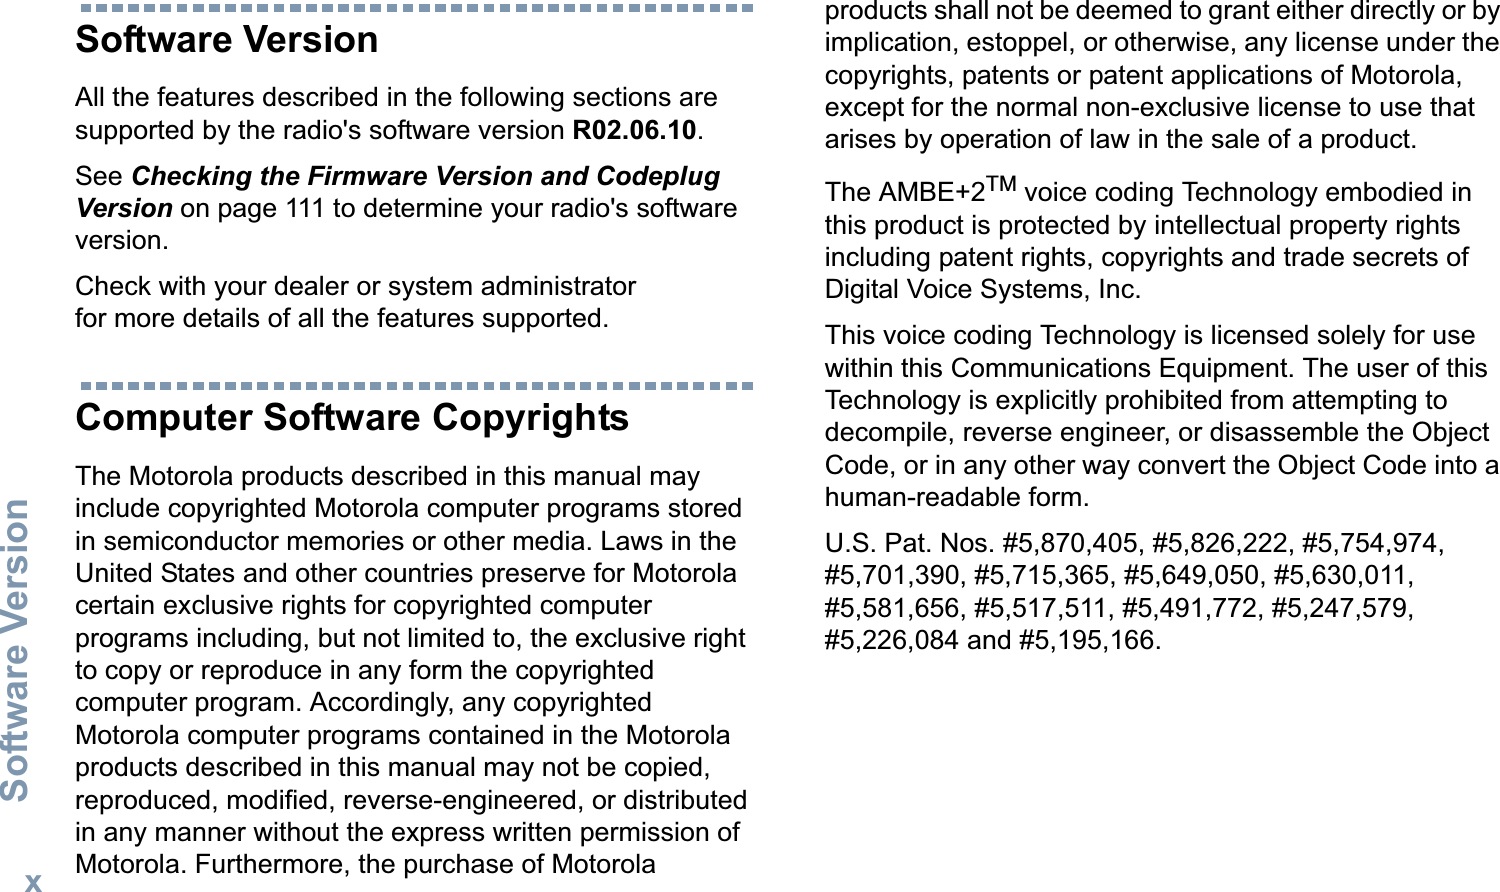 Software VersionEnglishxSoftware VersionAll the features described in the following sections are supported by the radio&apos;s software version R02.06.10. See Checking the Firmware Version and Codeplug Version on page 111 to determine your radio&apos;s software version. Check with your dealer or system administrator for more details of all the features supported.Computer Software CopyrightsThe Motorola products described in this manual may include copyrighted Motorola computer programs stored in semiconductor memories or other media. Laws in the United States and other countries preserve for Motorola certain exclusive rights for copyrighted computer programs including, but not limited to, the exclusive right to copy or reproduce in any form the copyrighted computer program. Accordingly, any copyrighted Motorola computer programs contained in the Motorola products described in this manual may not be copied, reproduced, modified, reverse-engineered, or distributed in any manner without the express written permission of Motorola. Furthermore, the purchase of Motorola products shall not be deemed to grant either directly or by implication, estoppel, or otherwise, any license under the copyrights, patents or patent applications of Motorola, except for the normal non-exclusive license to use that arises by operation of law in the sale of a product.The AMBE+2TM voice coding Technology embodied in this product is protected by intellectual property rights including patent rights, copyrights and trade secrets of Digital Voice Systems, Inc. This voice coding Technology is licensed solely for use within this Communications Equipment. The user of this Technology is explicitly prohibited from attempting to decompile, reverse engineer, or disassemble the Object Code, or in any other way convert the Object Code into a human-readable form. U.S. Pat. Nos. #5,870,405, #5,826,222, #5,754,974, #5,701,390, #5,715,365, #5,649,050, #5,630,011, #5,581,656, #5,517,511, #5,491,772, #5,247,579, #5,226,084 and #5,195,166.